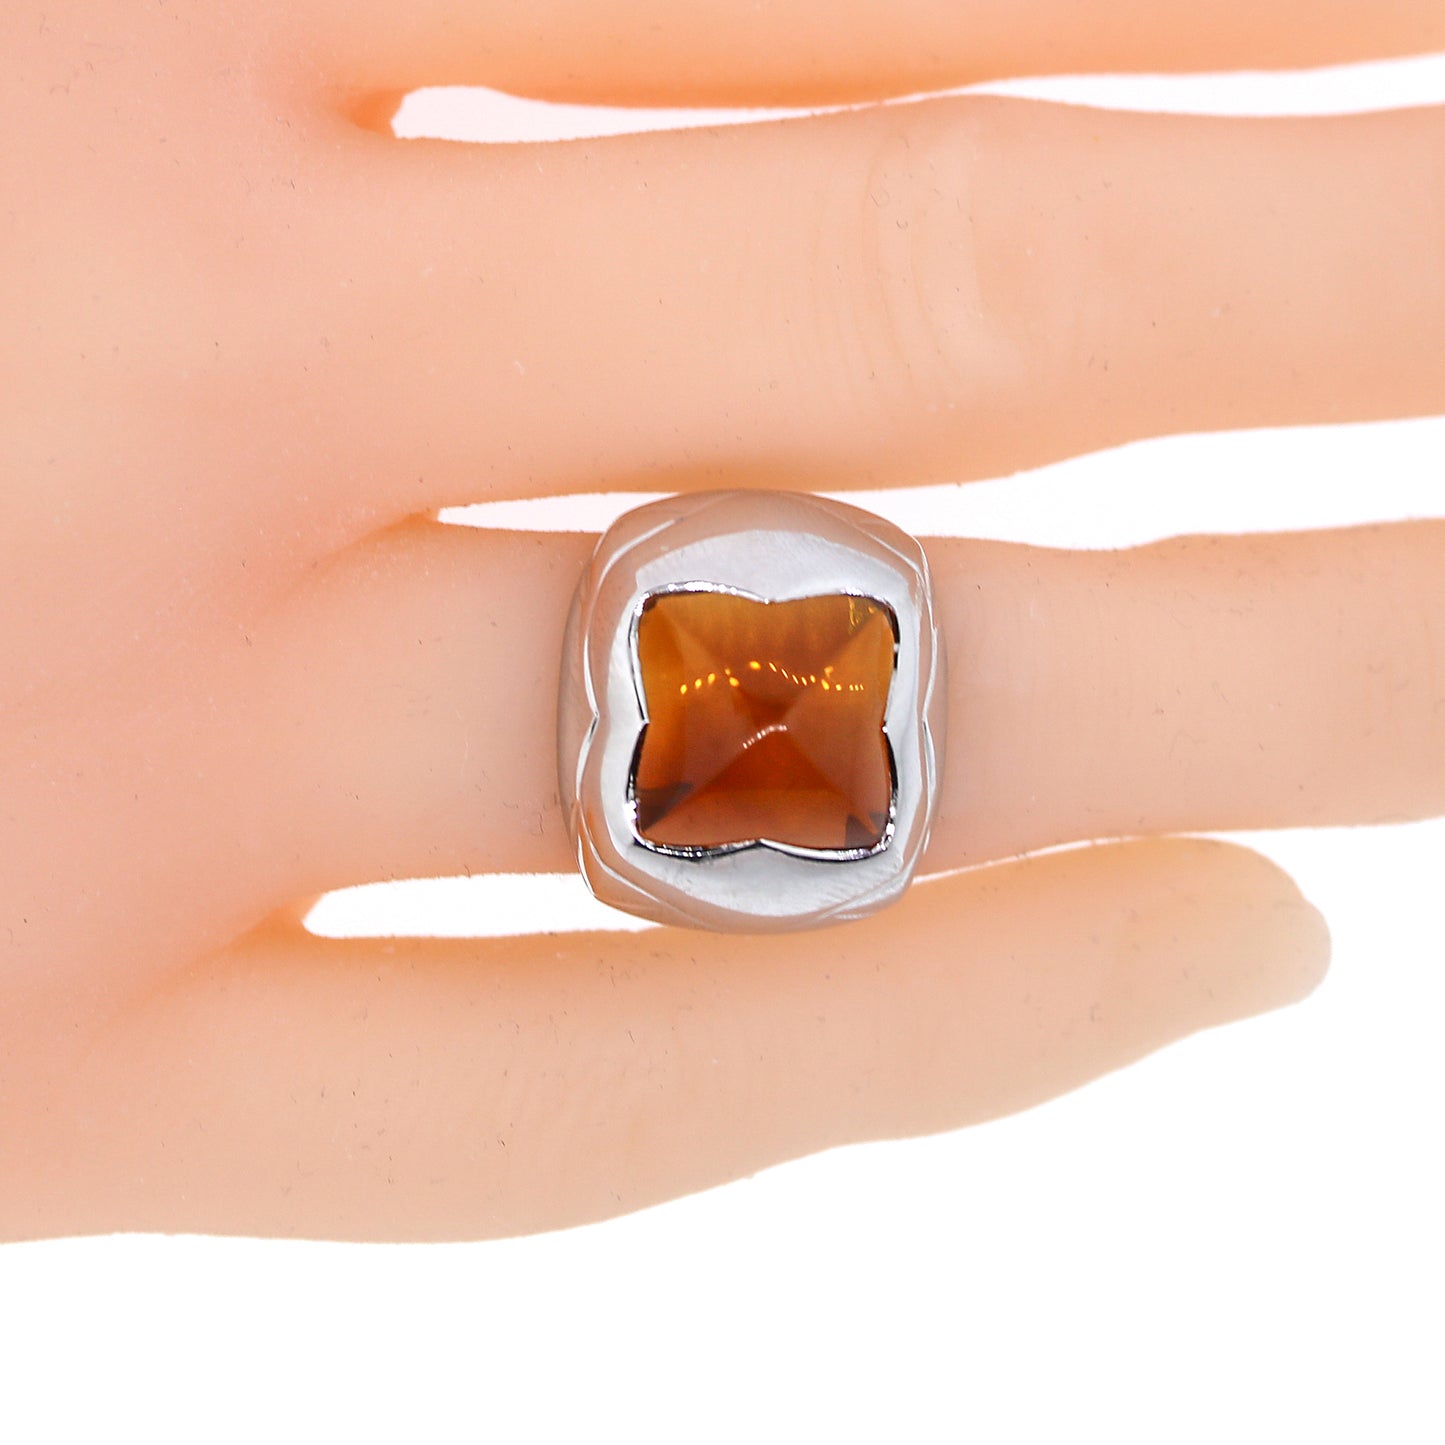 Load image into Gallery viewer, Bvlgari Citrine Pyramid Ring in 18k White Gold
